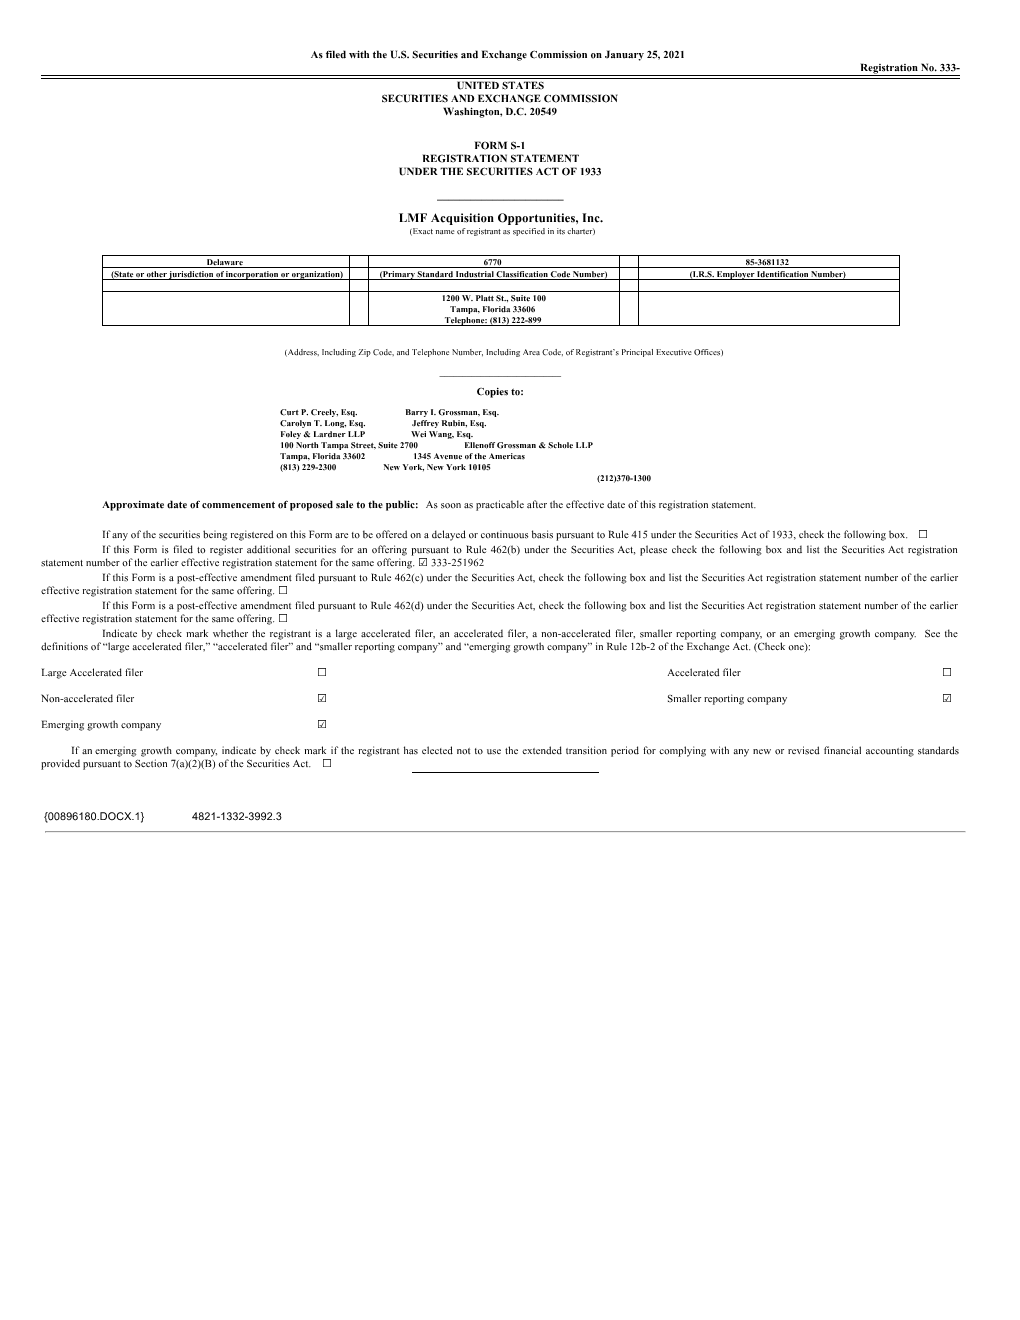 LMF Acquisition Opportunities, Inc. (Exact Name of Registrant As Specified in Its Charter)